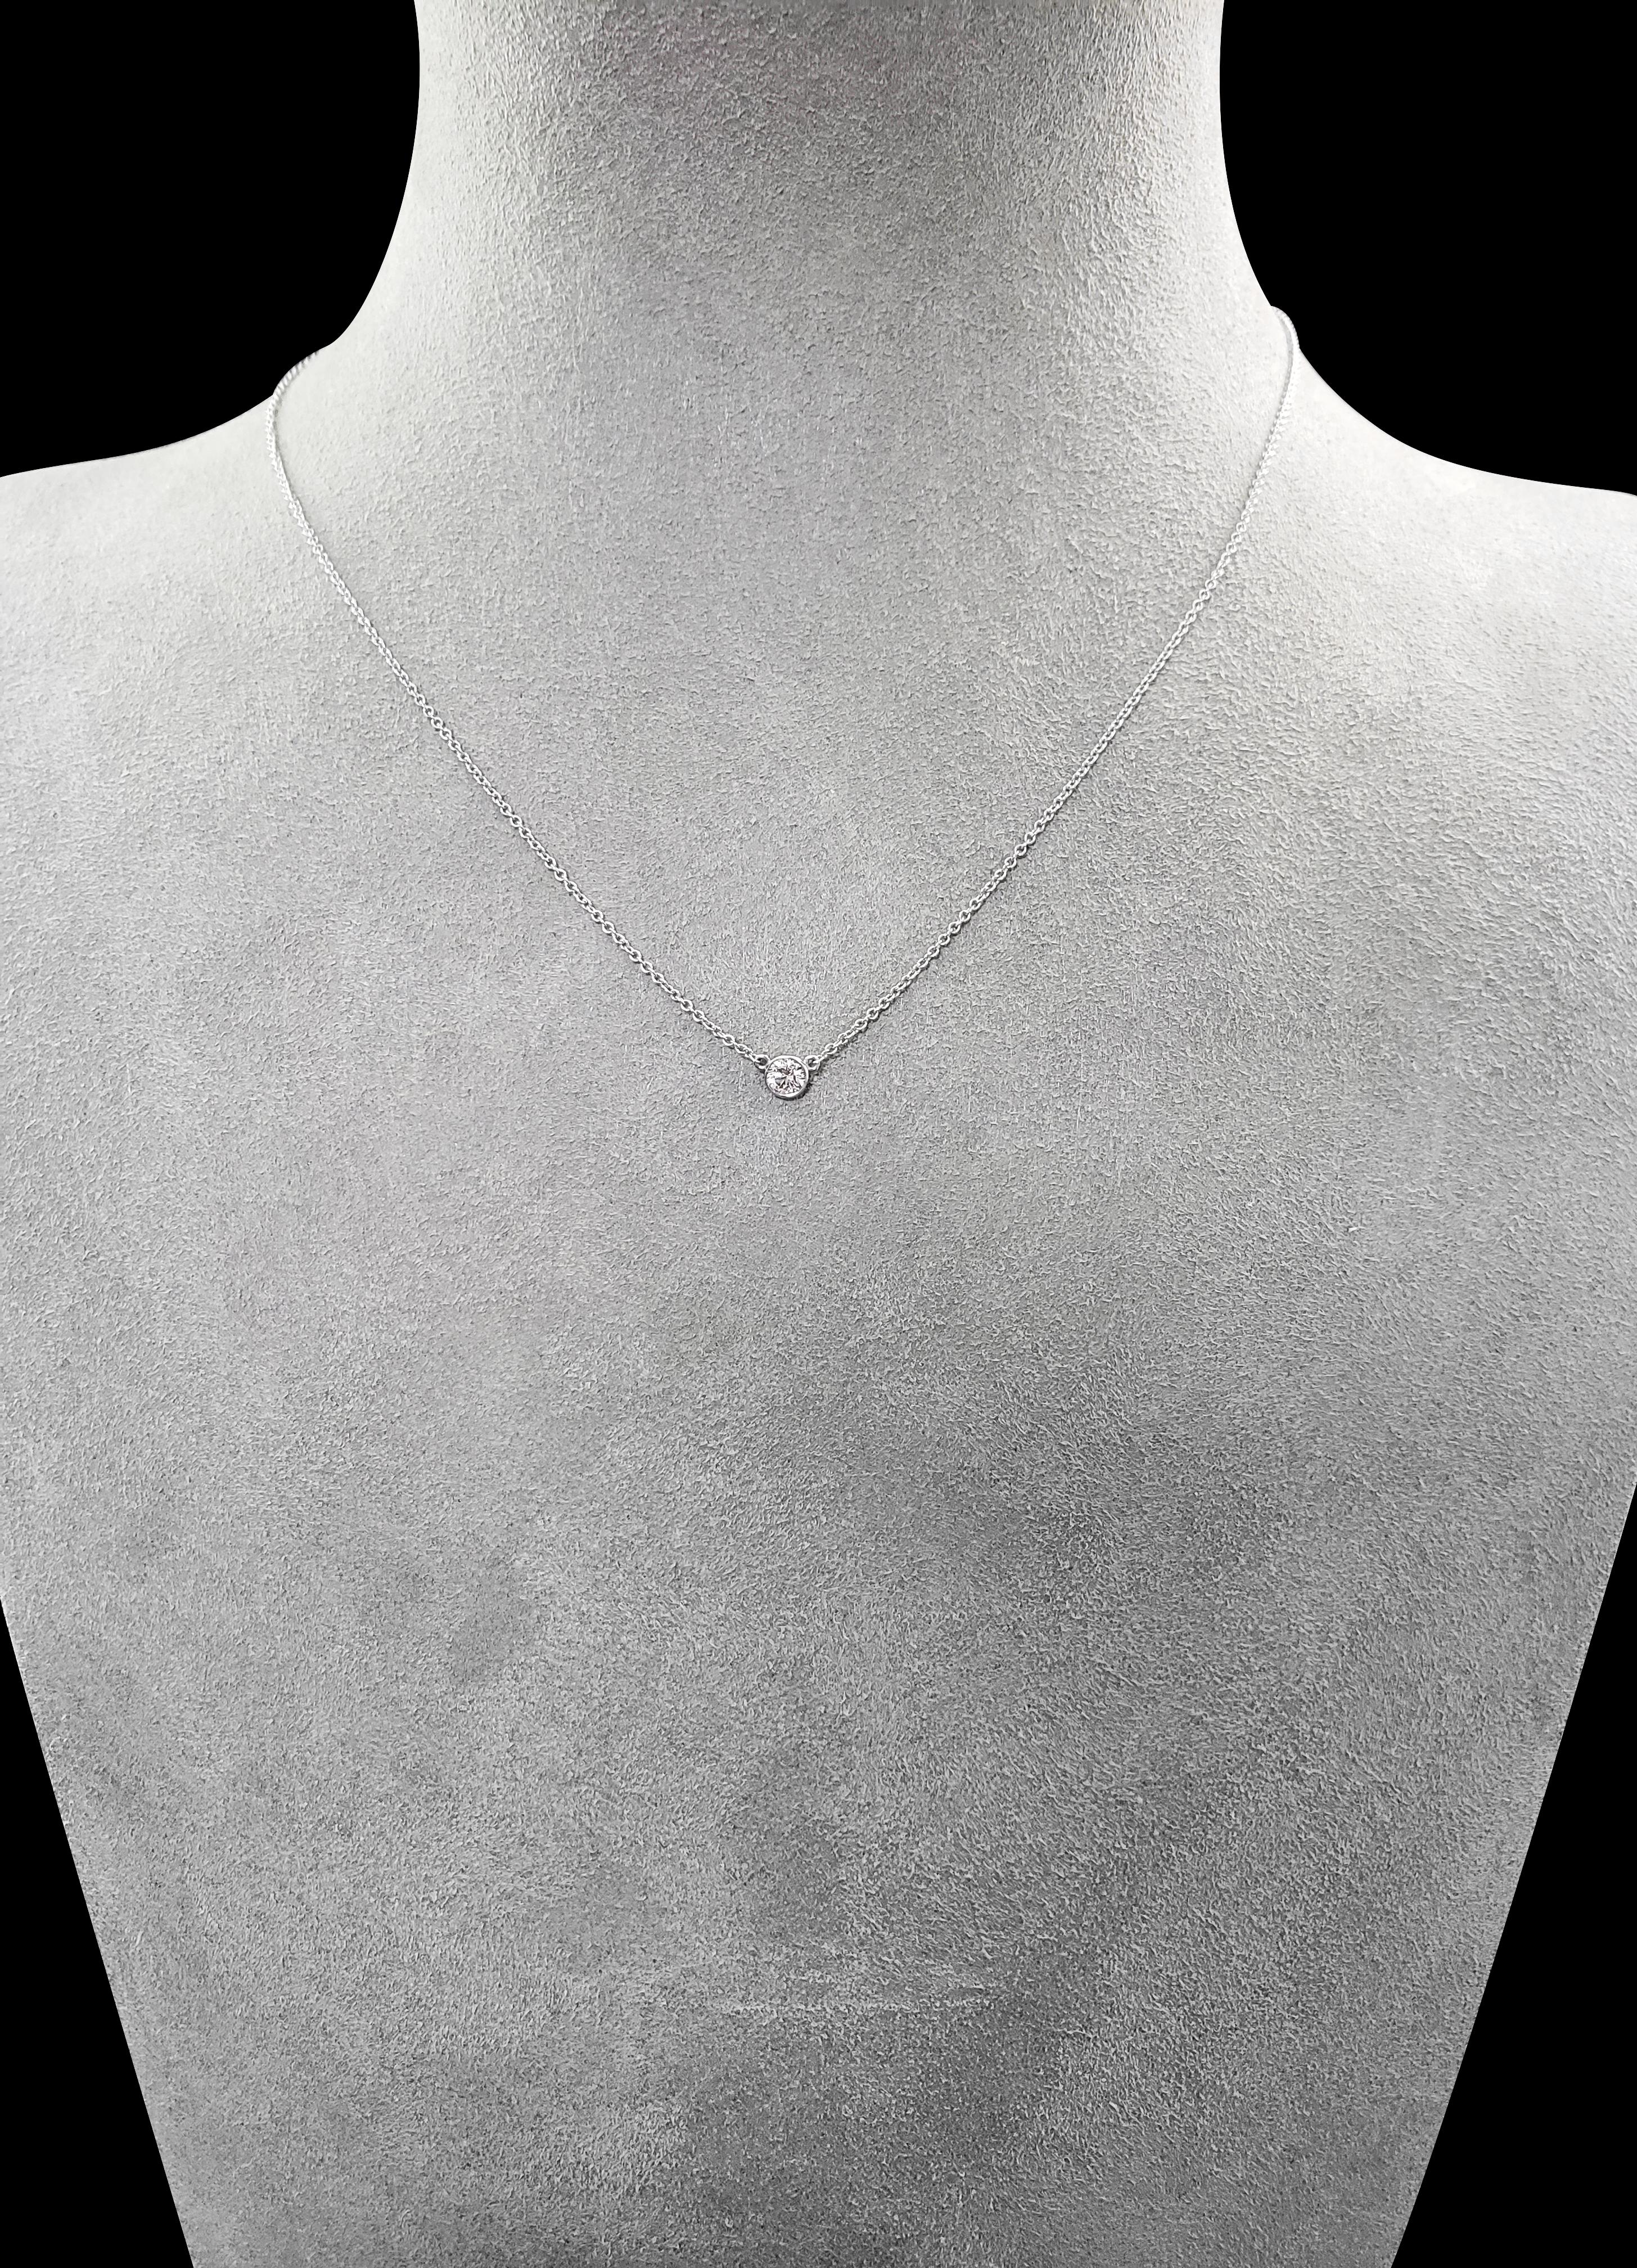 A simple and versatile solitaire pendant necklace showcasing a single 0.18 carat round diamond in a 14 karat white gold bezel. Attached to a 16 inch white gold chain. 

Style available in different price ranges. Prices are based on your selection of